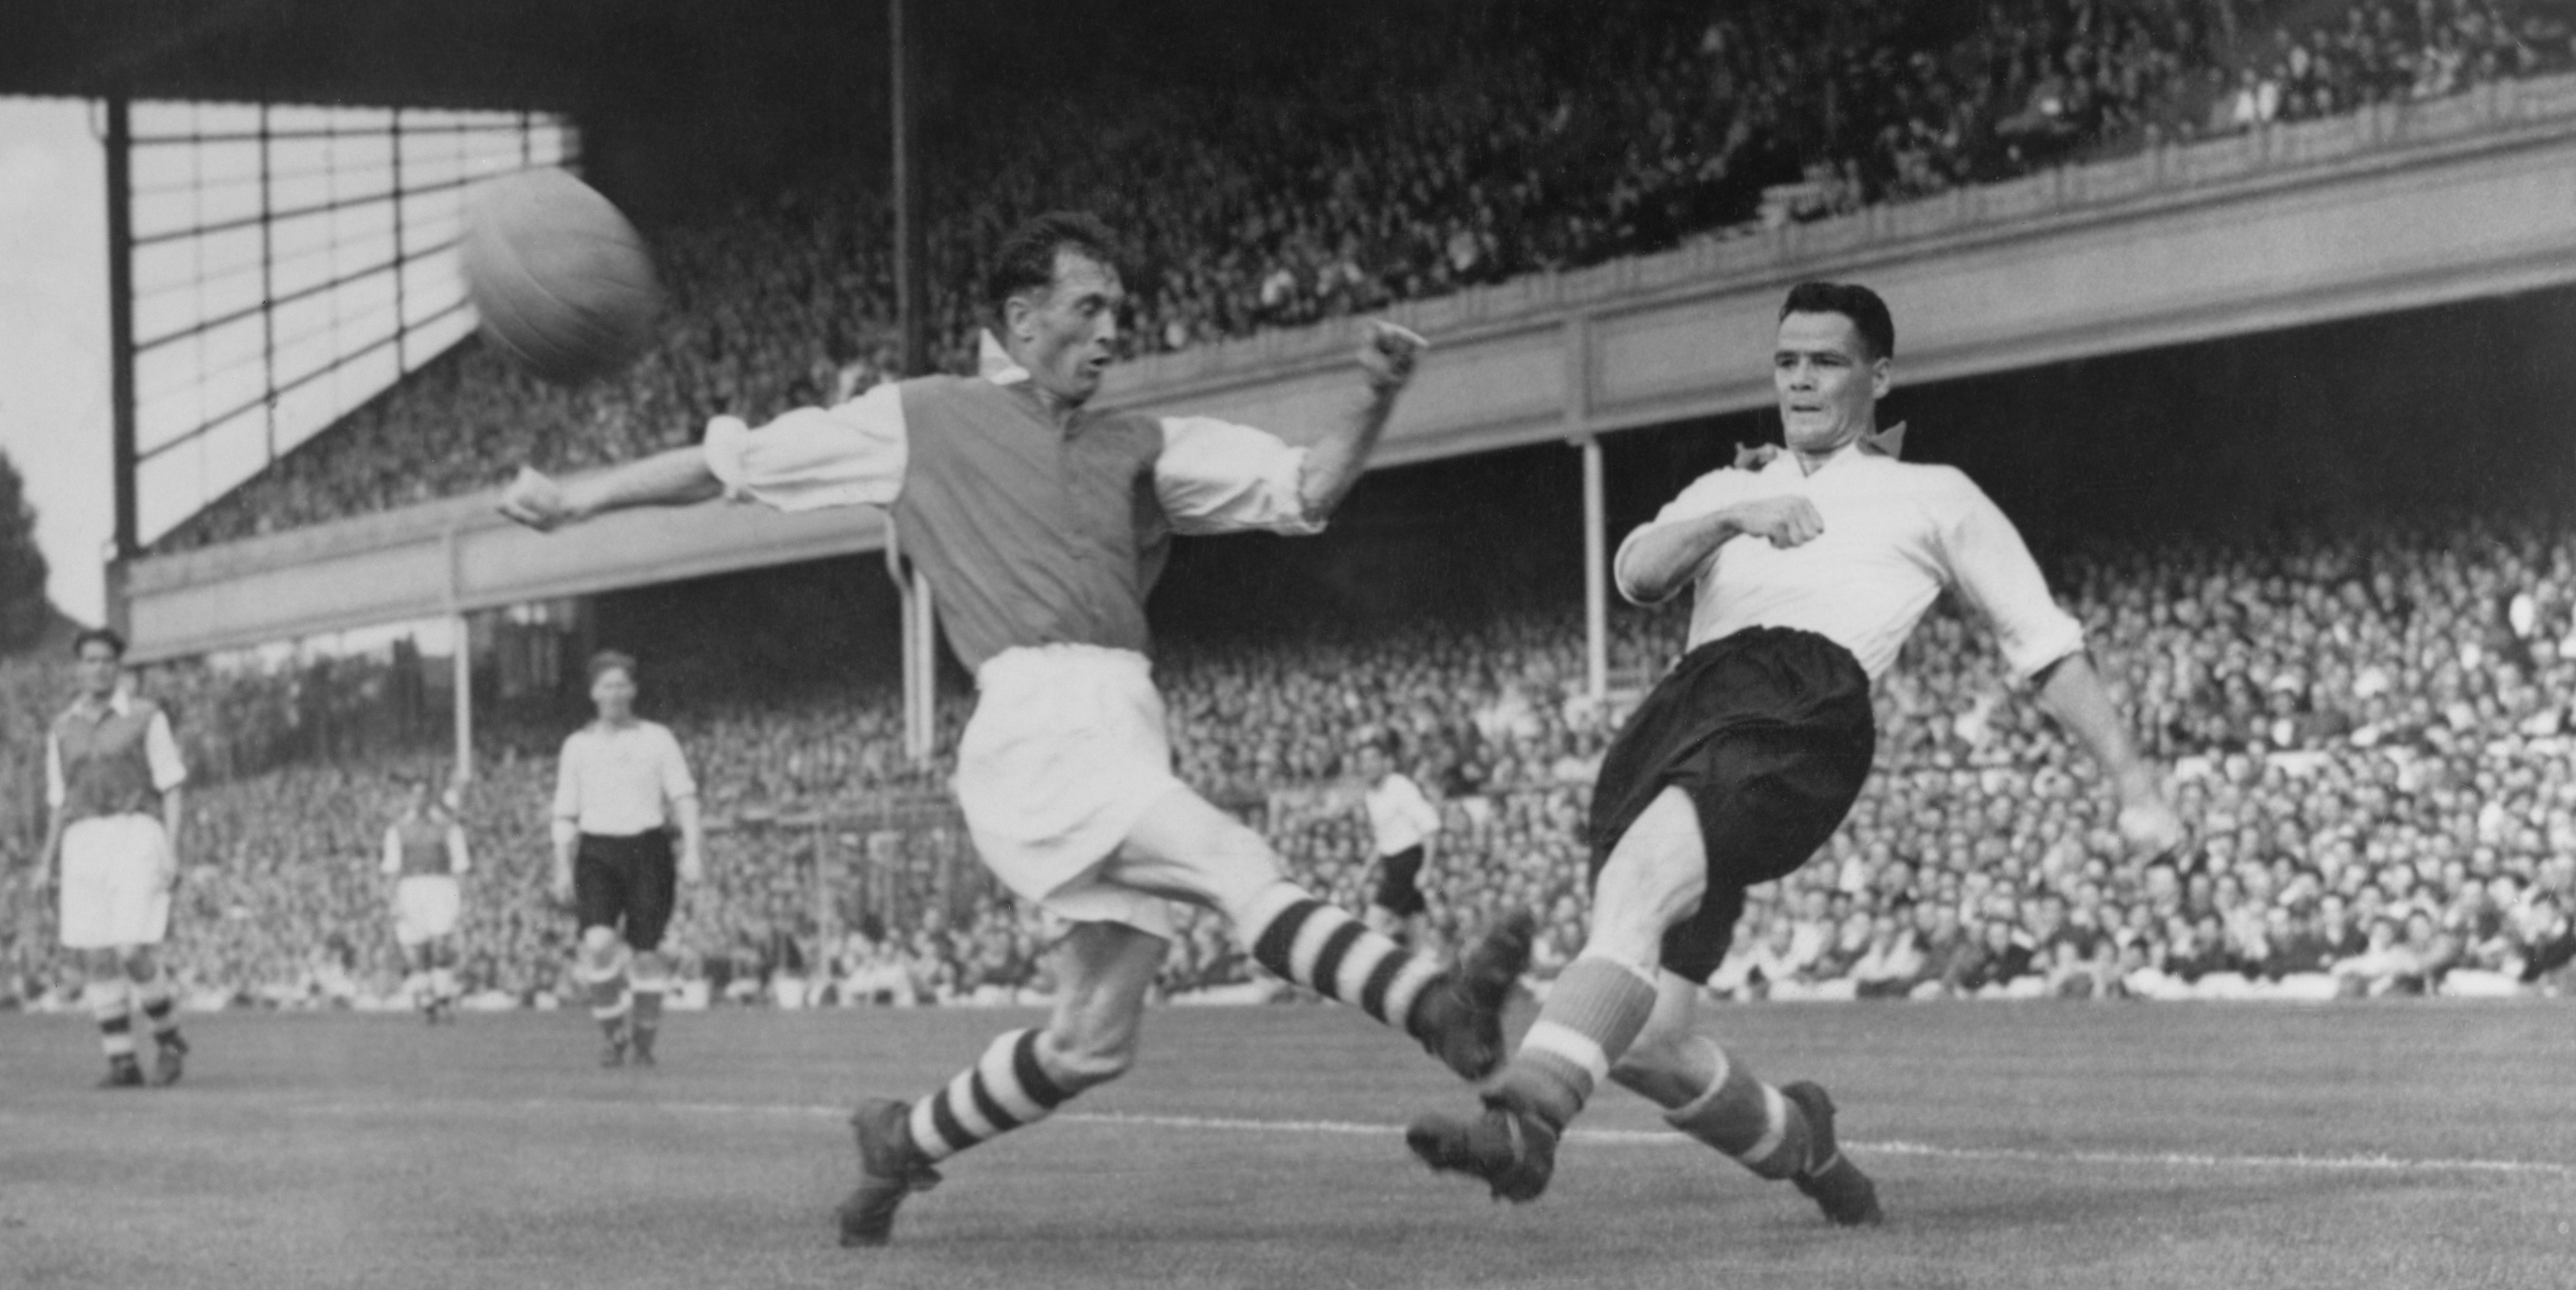 Why Billy Liddell was once described as ‘the one constant that kept Liverpool at the forefront of English football’